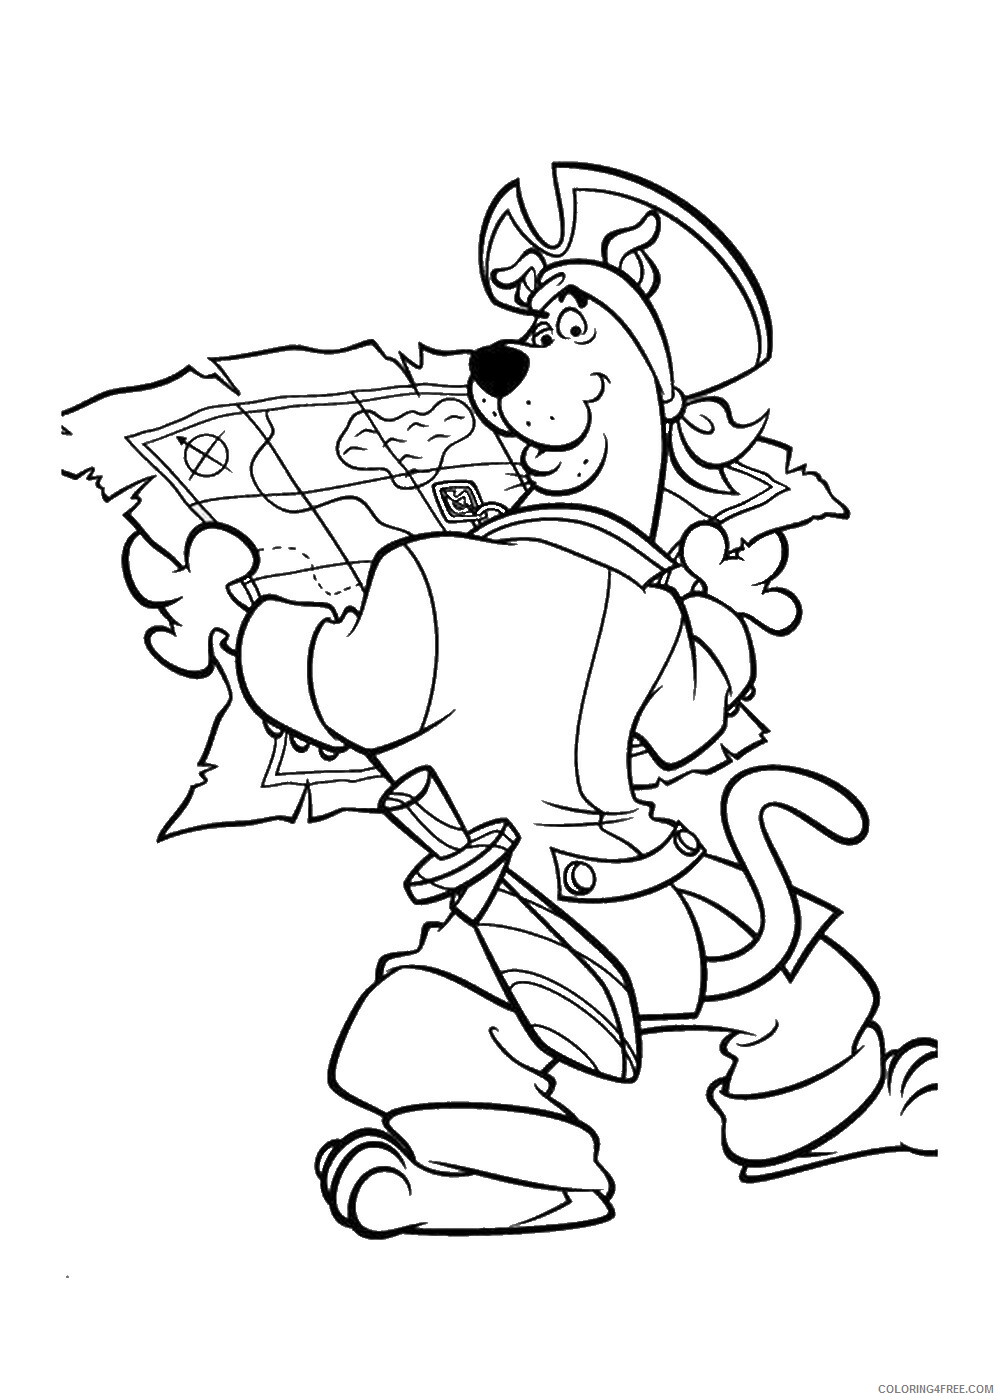 Scooby Doo Coloring Pages TV Film scooby_doo_cl_33 Printable 2020 07276 Coloring4free